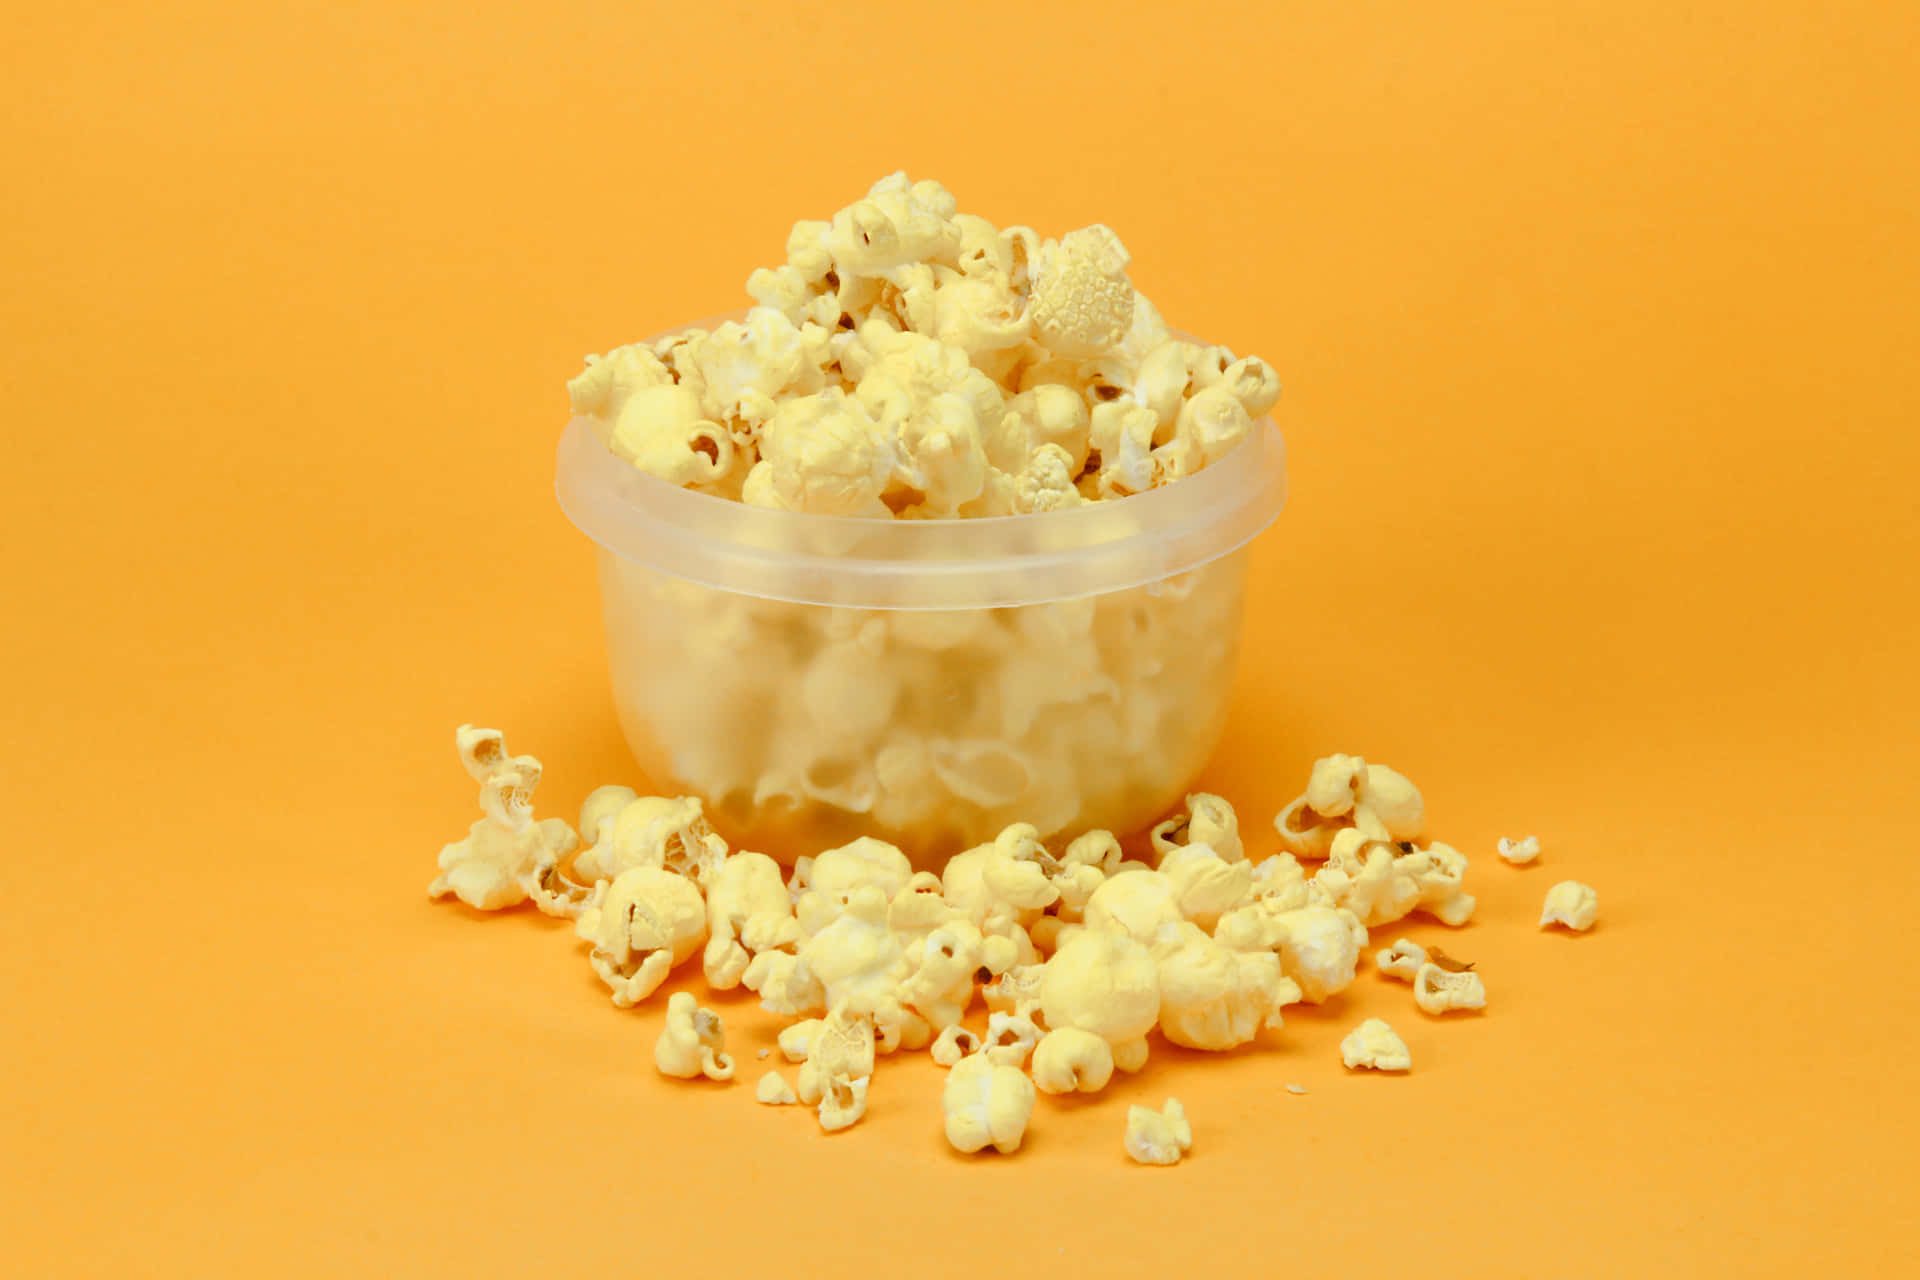 A White Plastic Container With Popcorn On An Orange Background